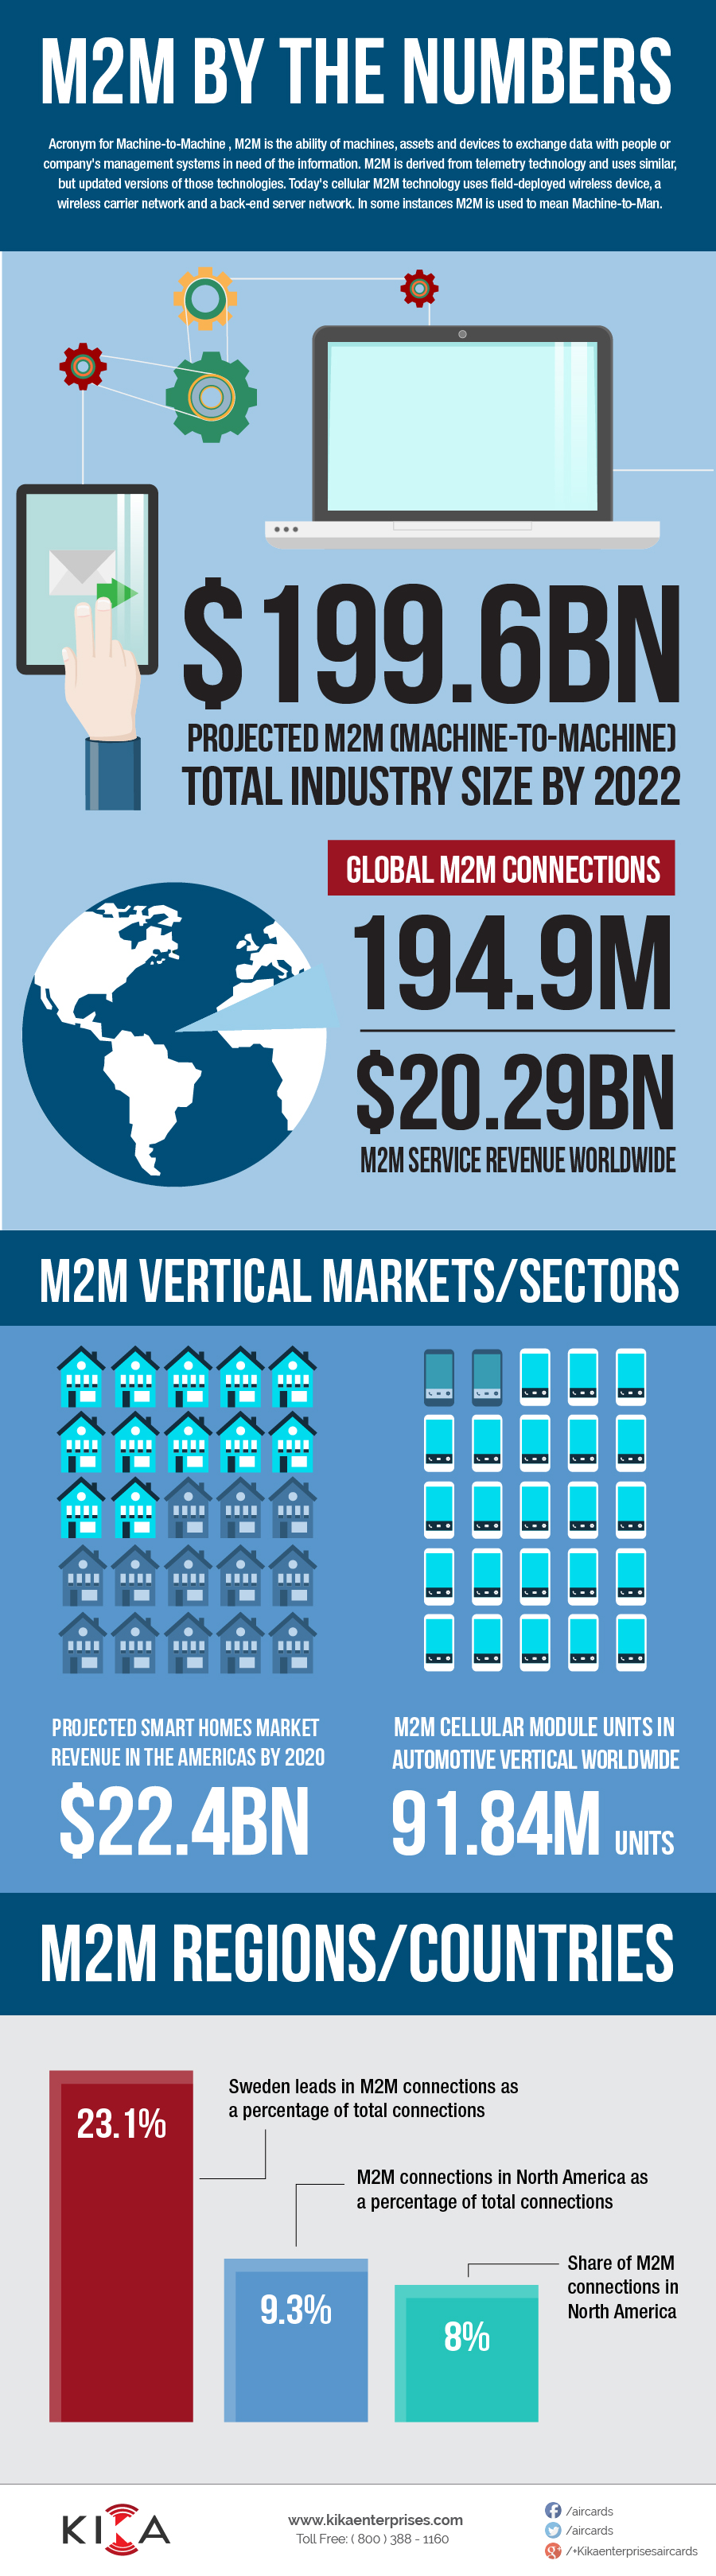 M2M By the Numbers